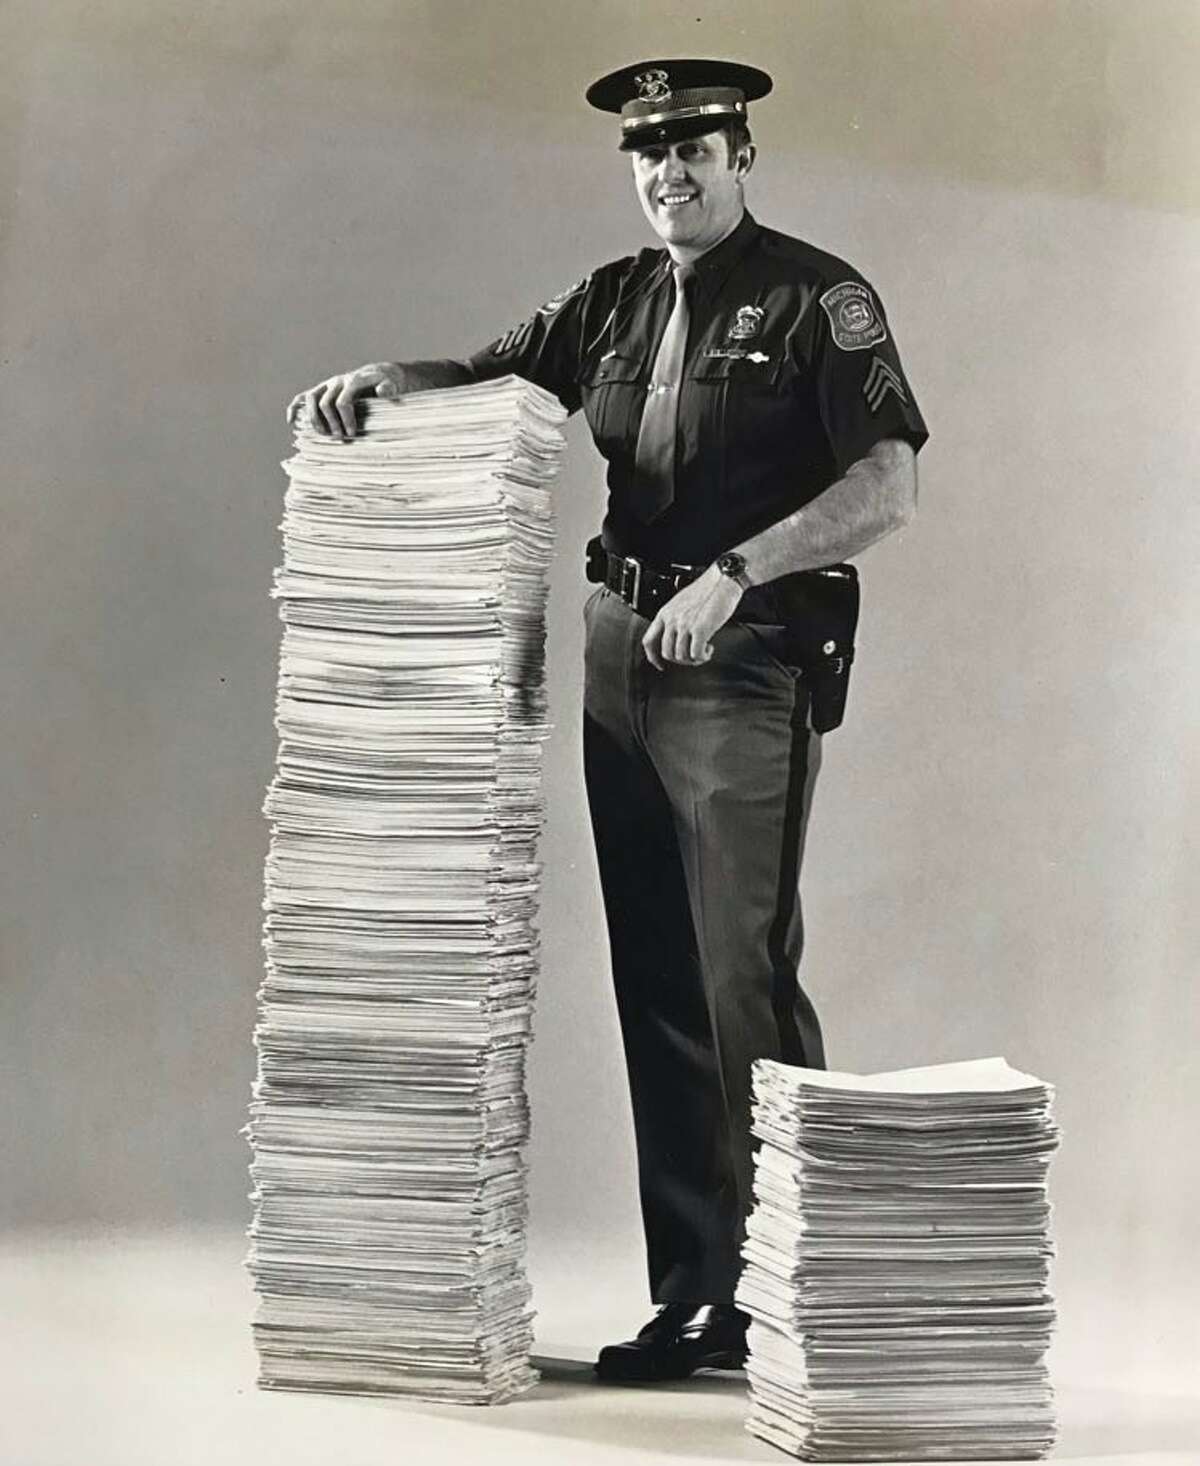 Michigan State Police Sgt. Gordon Gotts, president of the 1,460-member Michigan State Police Troopers Association, with 166,000 signatures of Michigan registered voters who have signed a petition to put the issue of collective bargaining for state troopers and sergeants on the 1978 General Election Ballot. Gotts, who stands at 6 foot 4 inches, is shown with a stack of signed petitions. January 1978